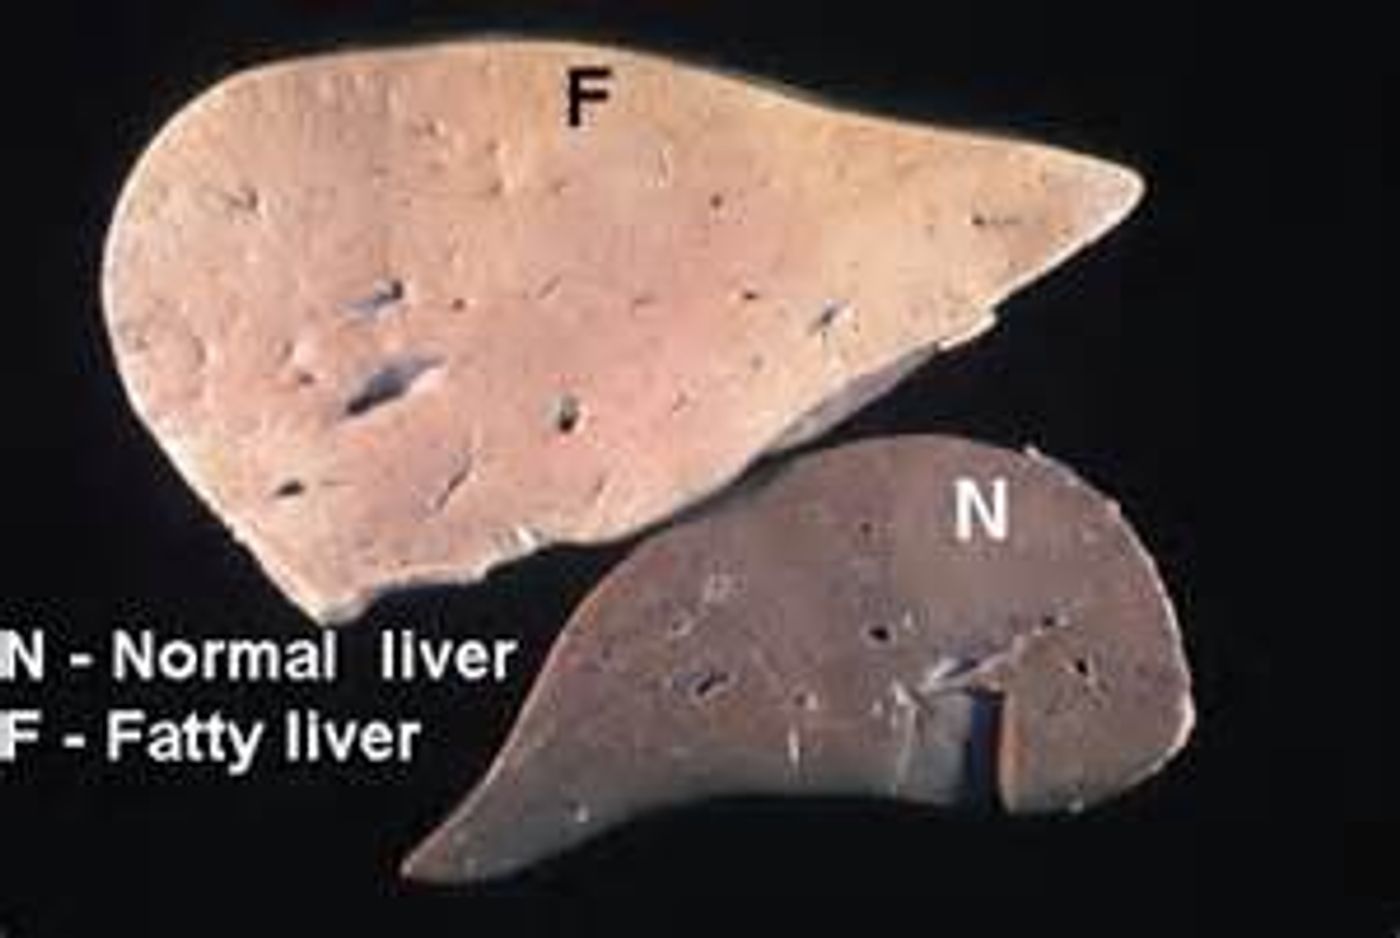 An example of a healthy liver compared with an enlarged fatty liver.